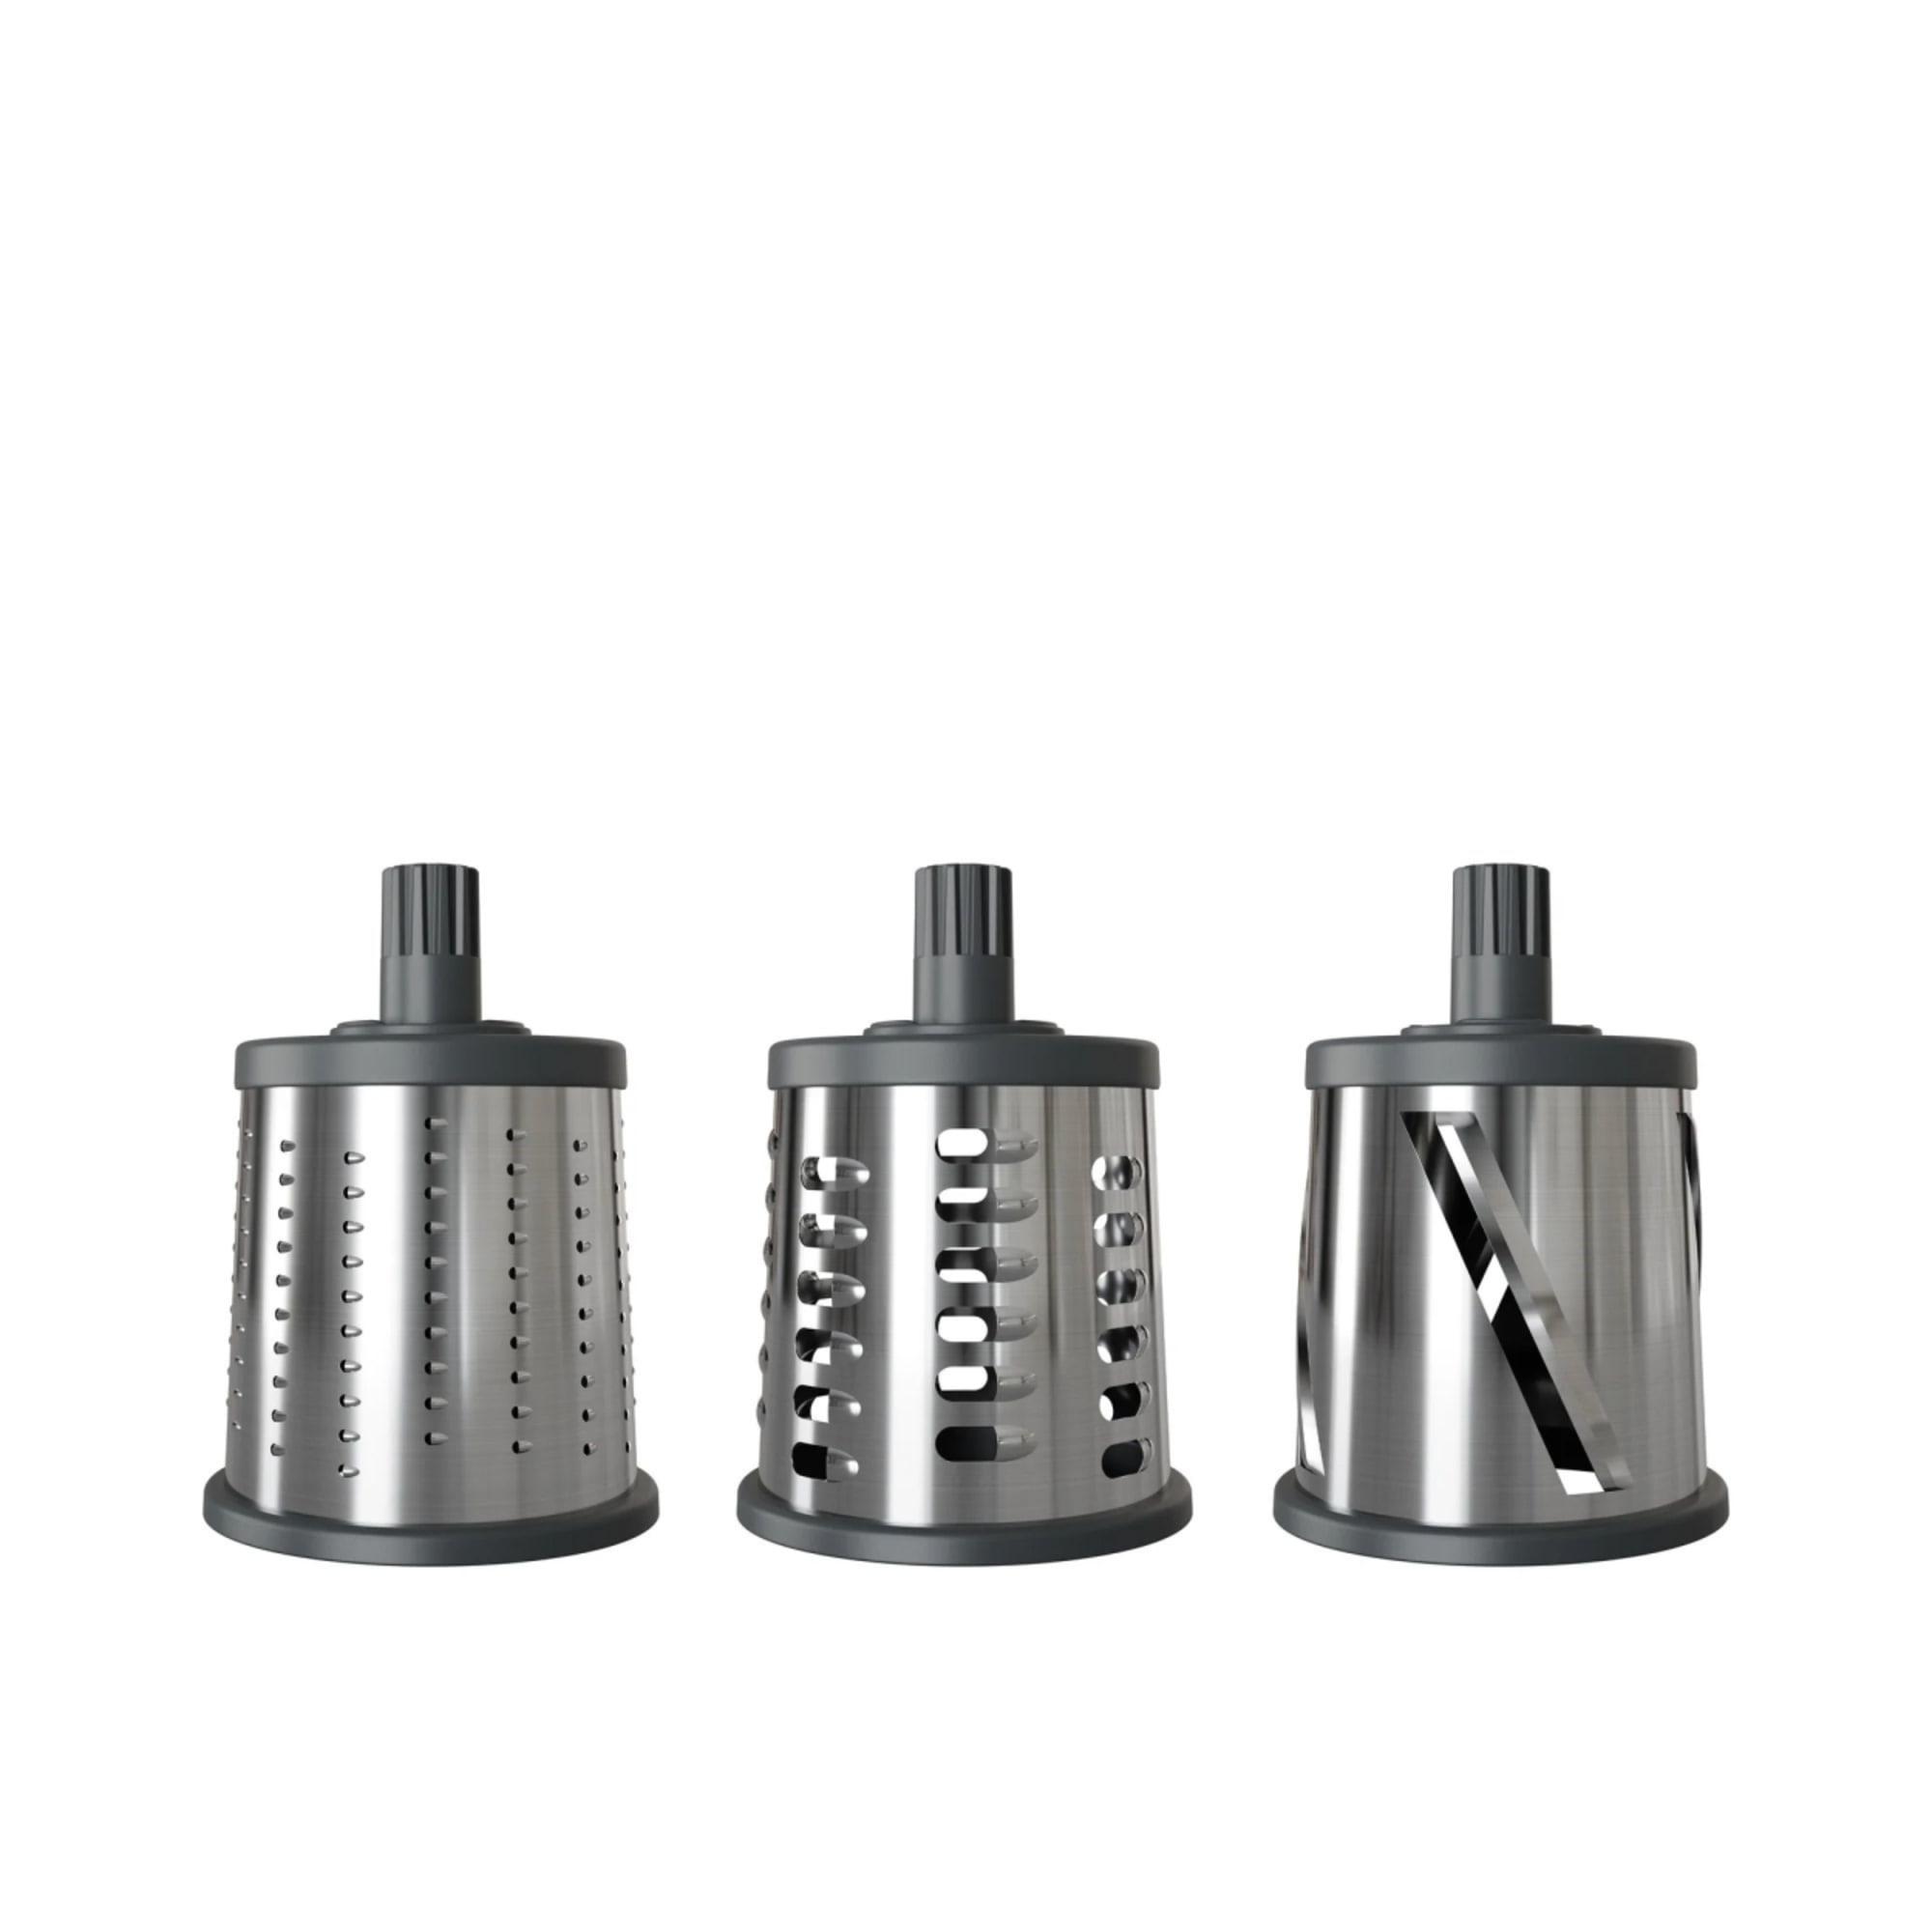 Zyliss Gourmet Drum Grater with 3 Drums Image 4